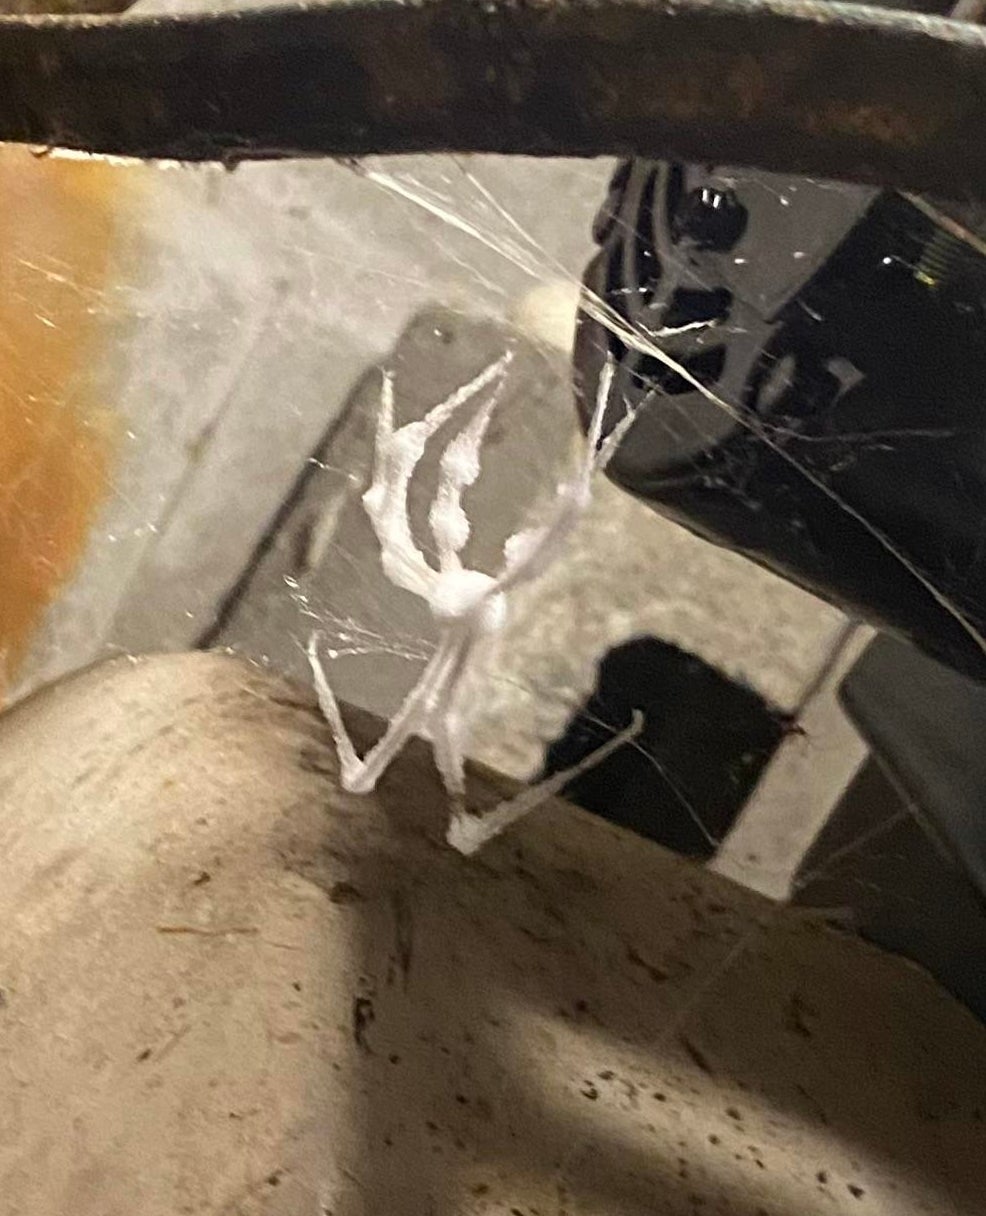 large spider in its web that looks covered in a white paste